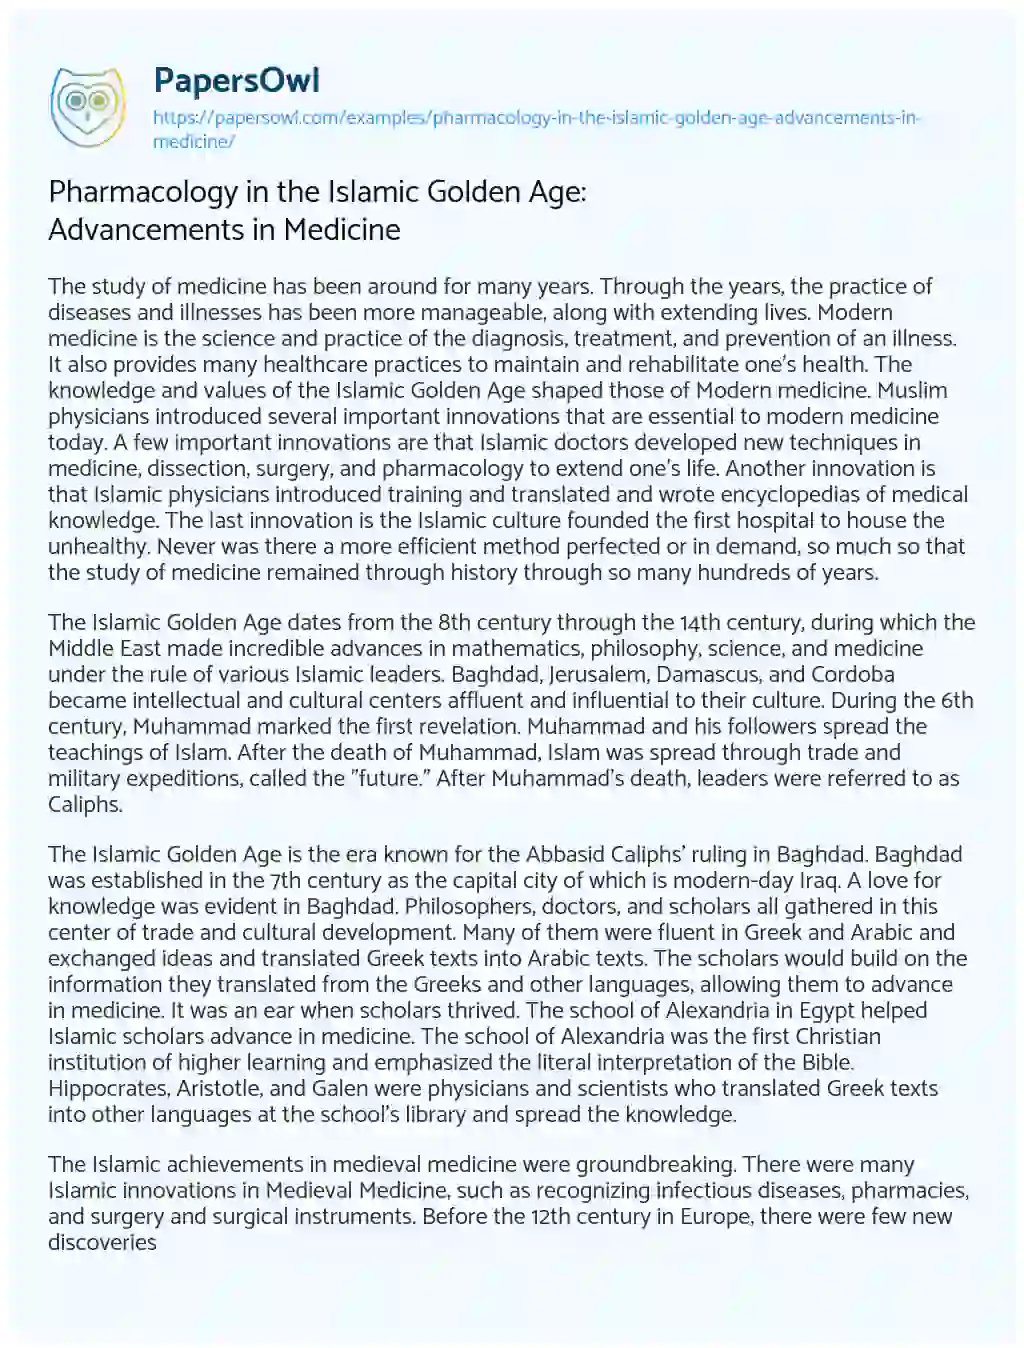 Essay on Pharmacology in the Islamic Golden Age: Advancements in Medicine